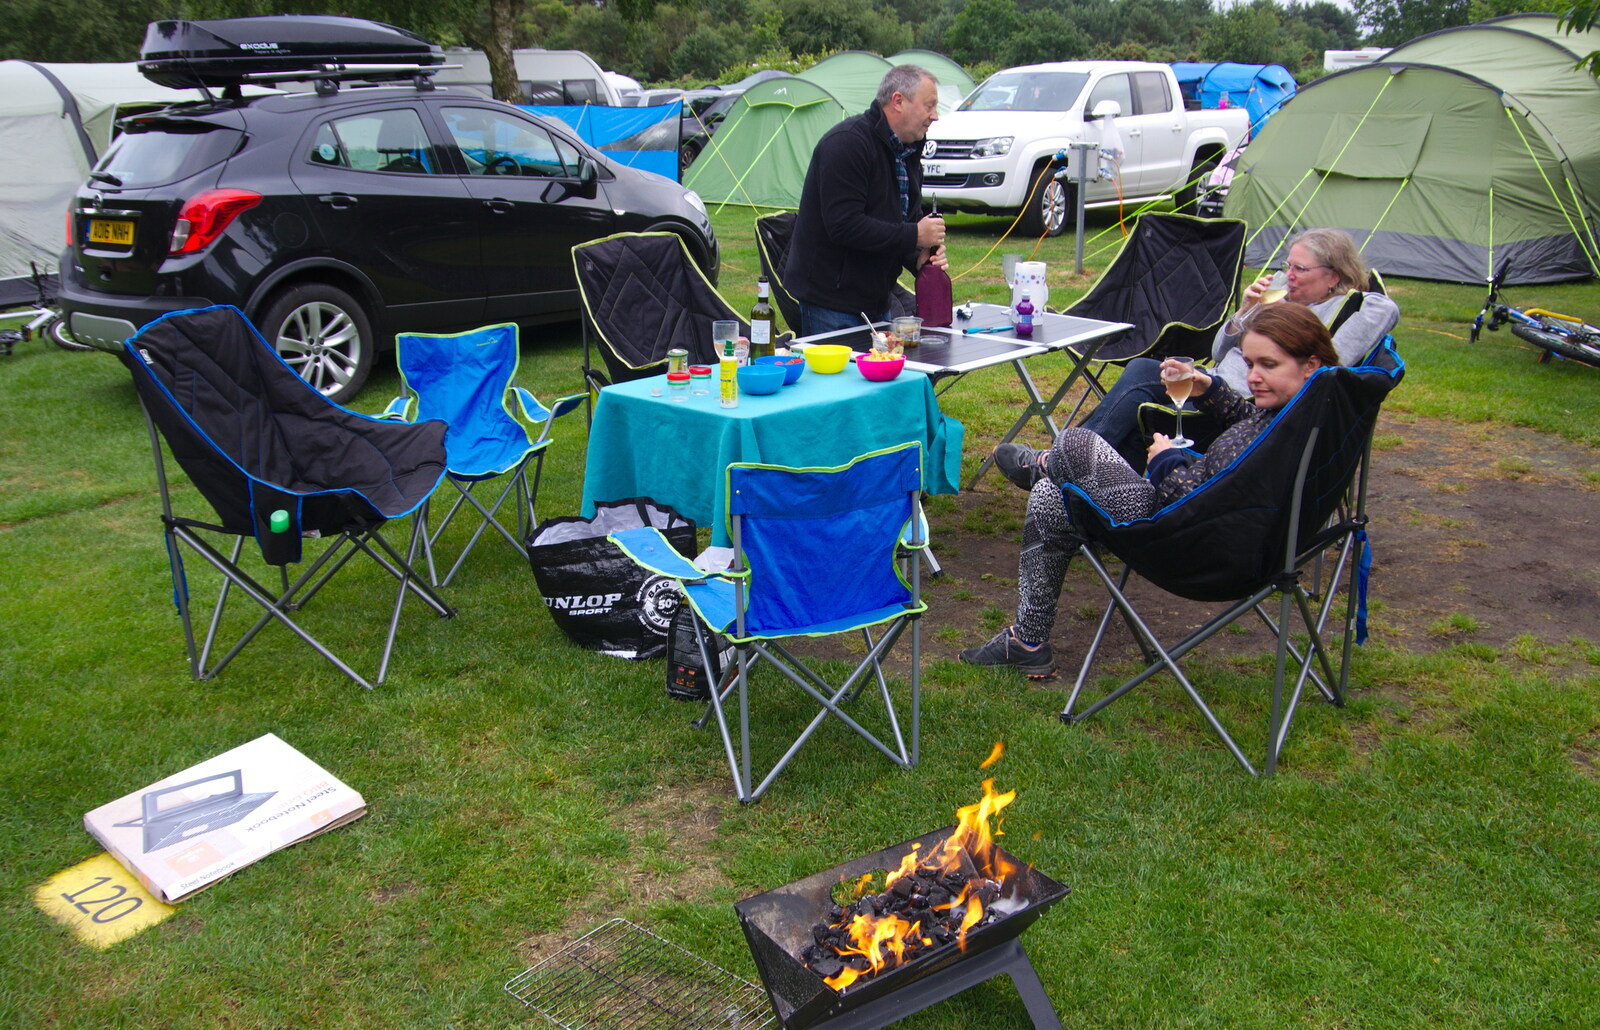 We have a barbeque from Kelling Camping and the Potty Morris Festival, Sheringham, North Norfolk - 6th July 2019